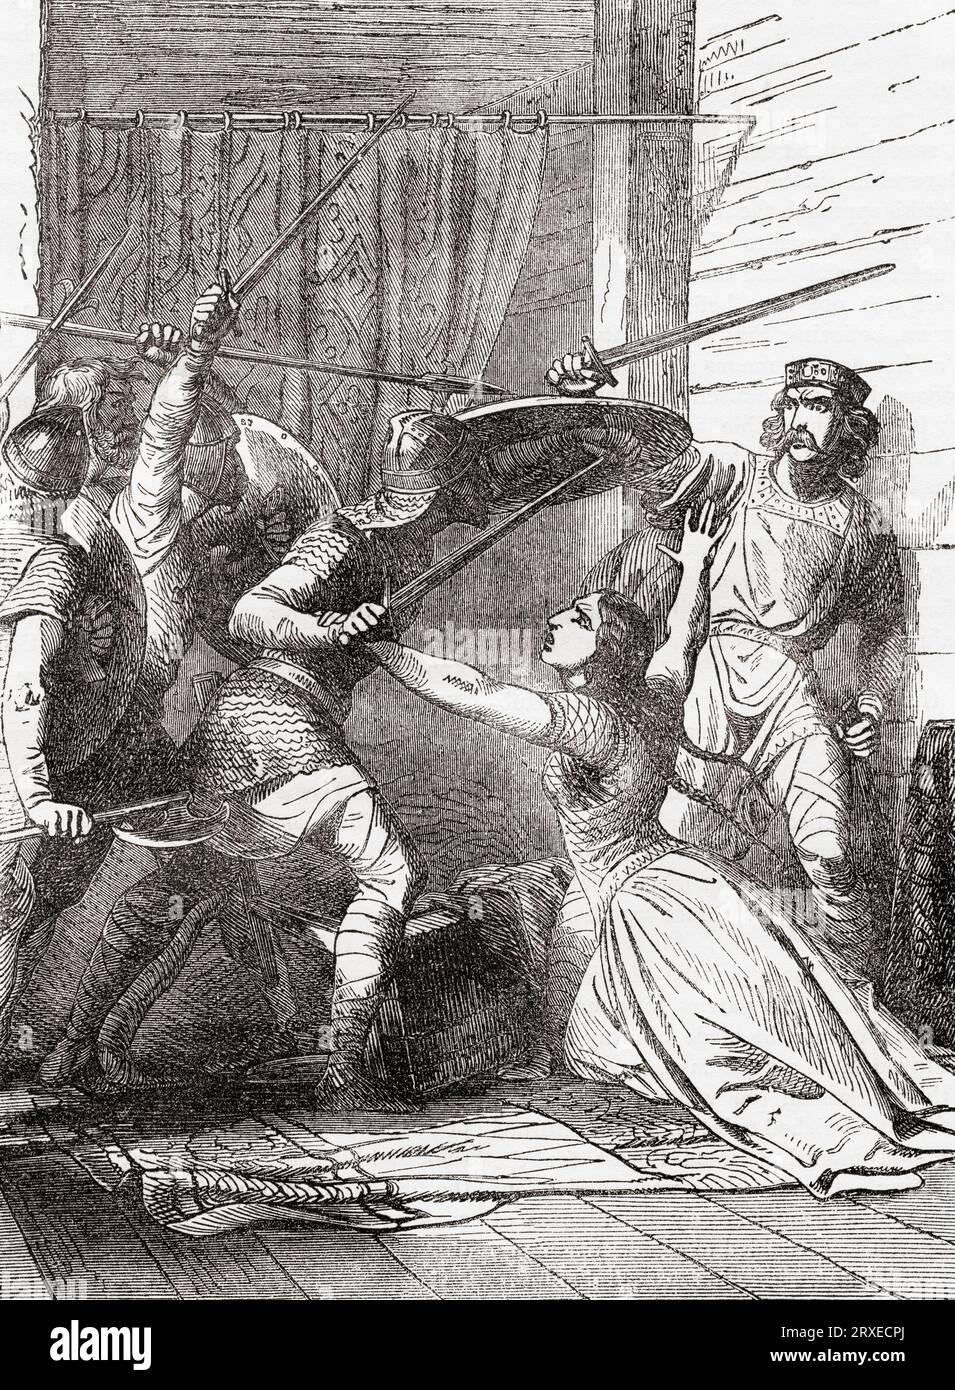 The murder of Cynewulf, at the house of his mistress, in a surprise attack by Cyneheard, both died in the attack.  Cynewulf, King of Wessex from 757 until his death in 786.  Cyneheard the Atheling (died 786) brother of Sigeberht, briefly King of Wessex deposed in 757 with the agreement of the Witan. Cynewulf of Wessex succeeded as King.  From Cassell's Illustrated History of England, published 1857. Stock Photo